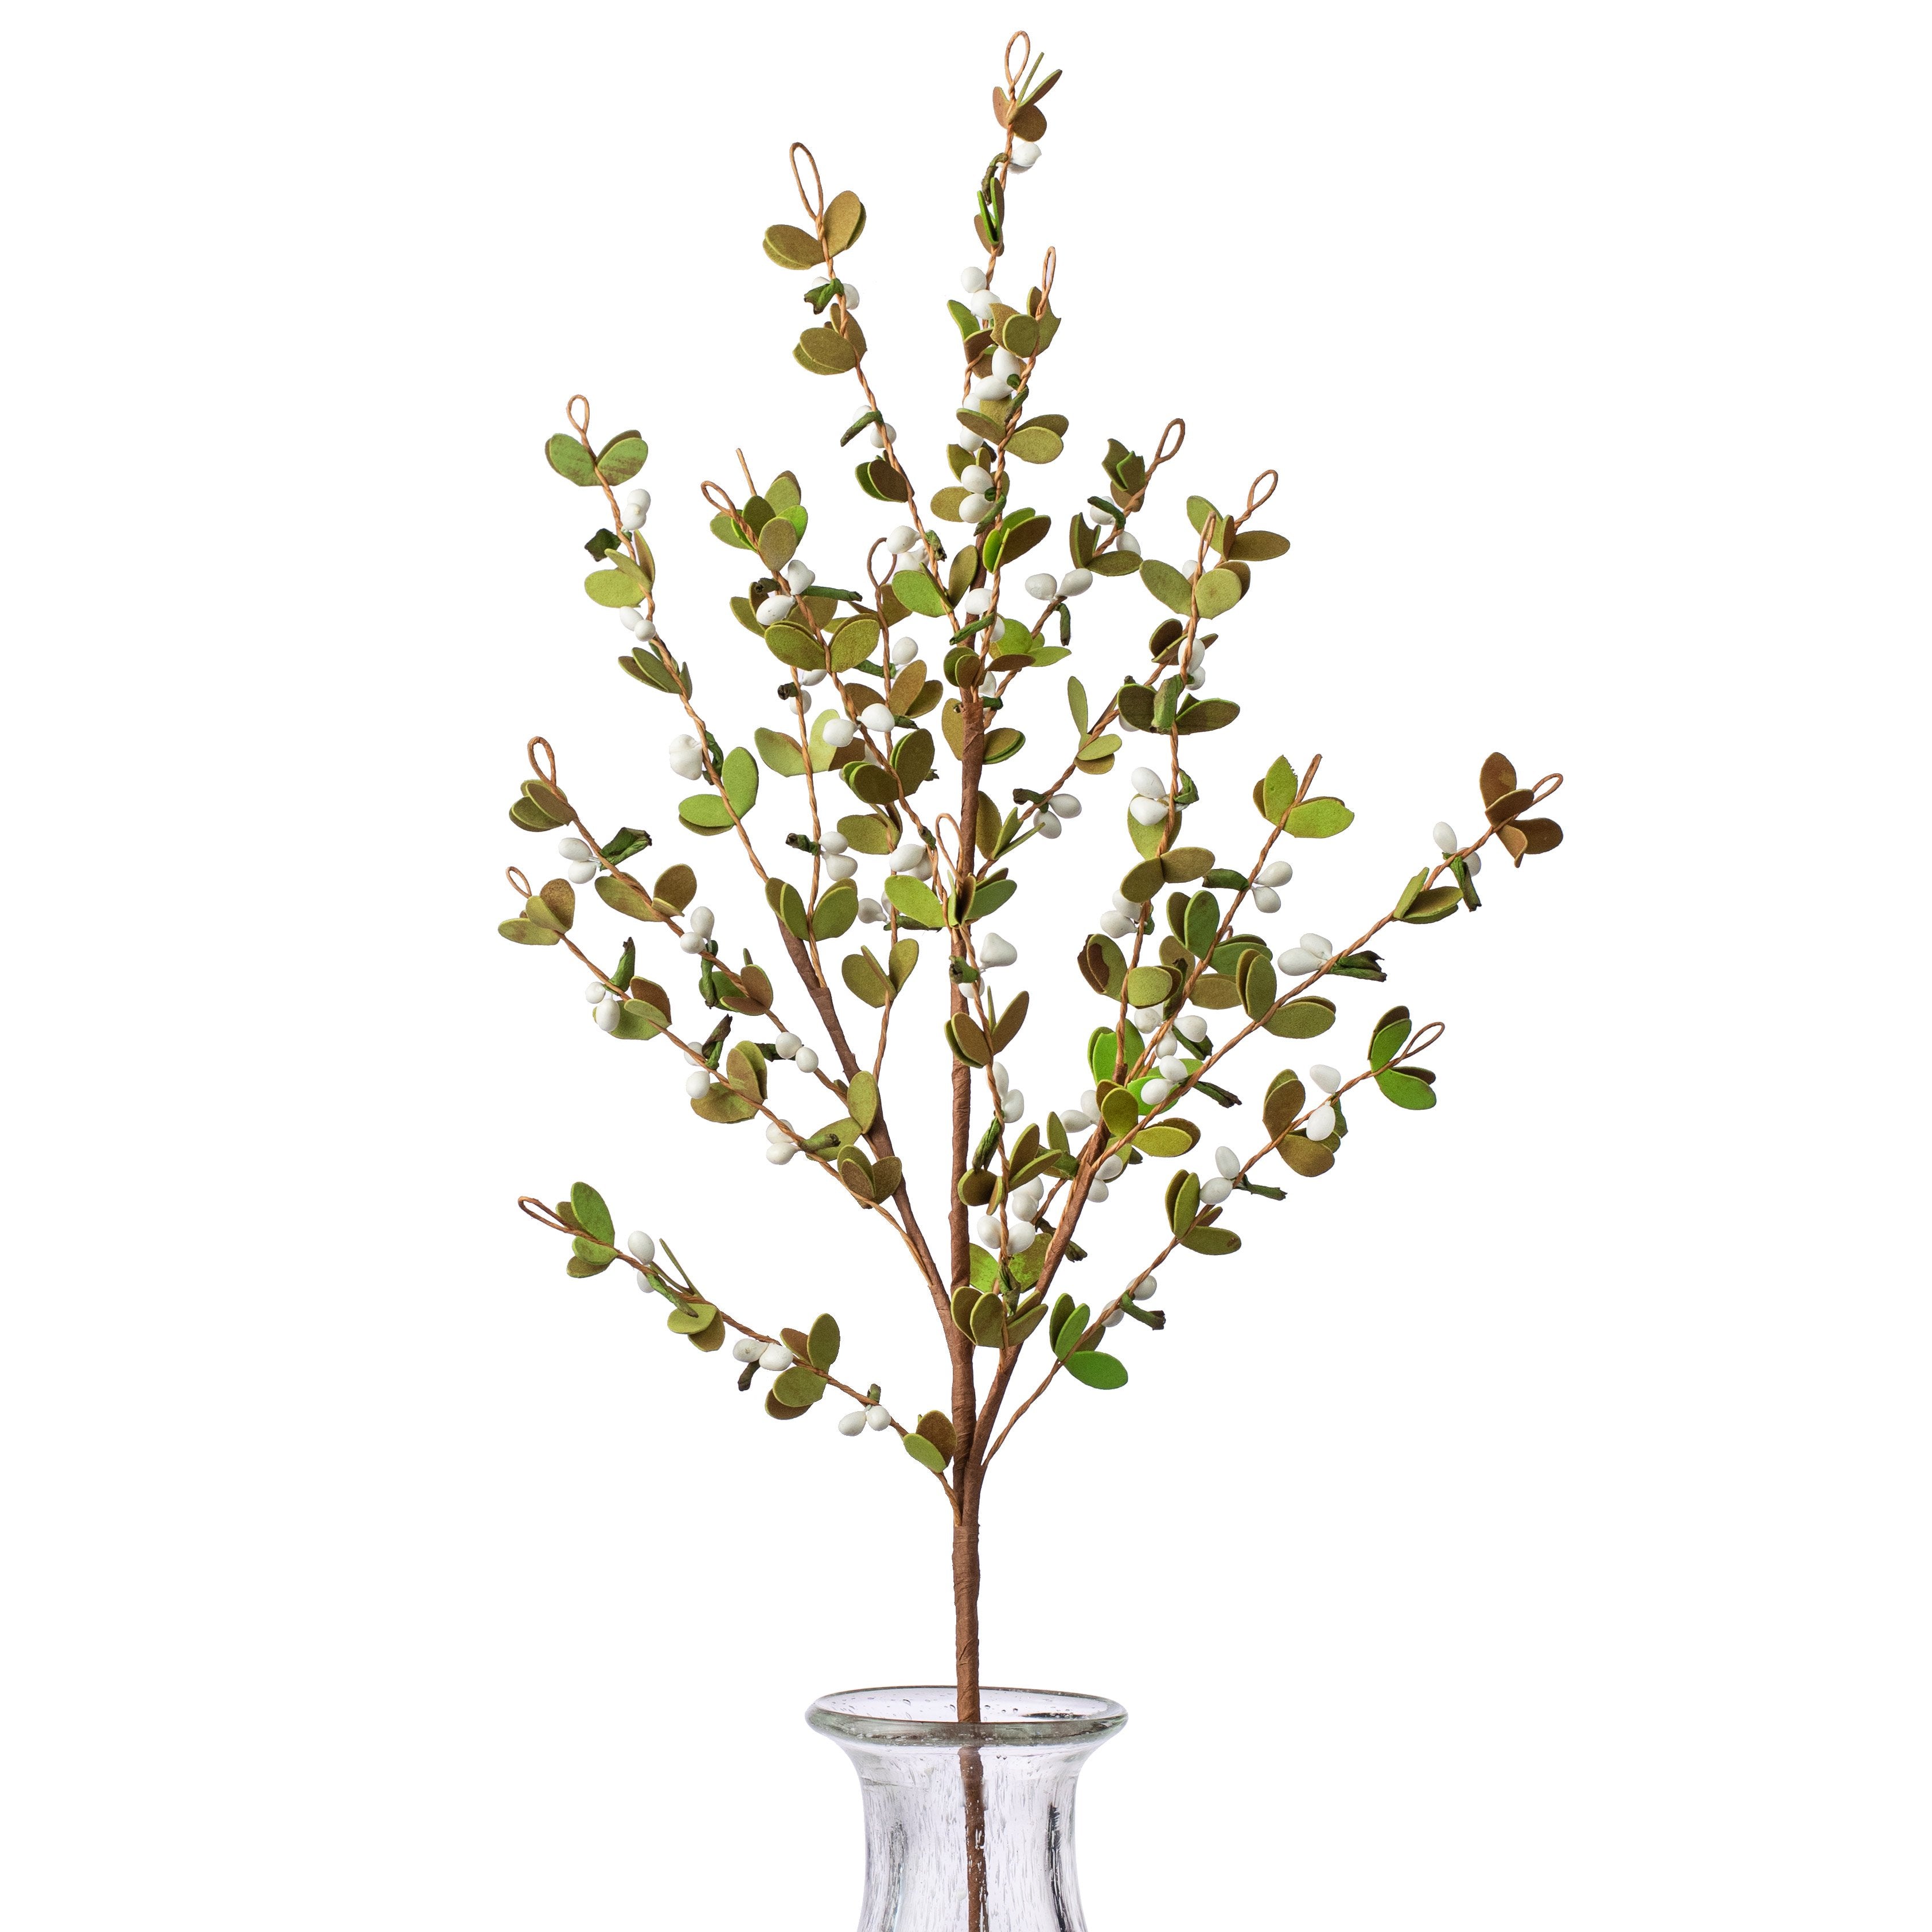 32" Boxwood Floral Spray With Cream Berries